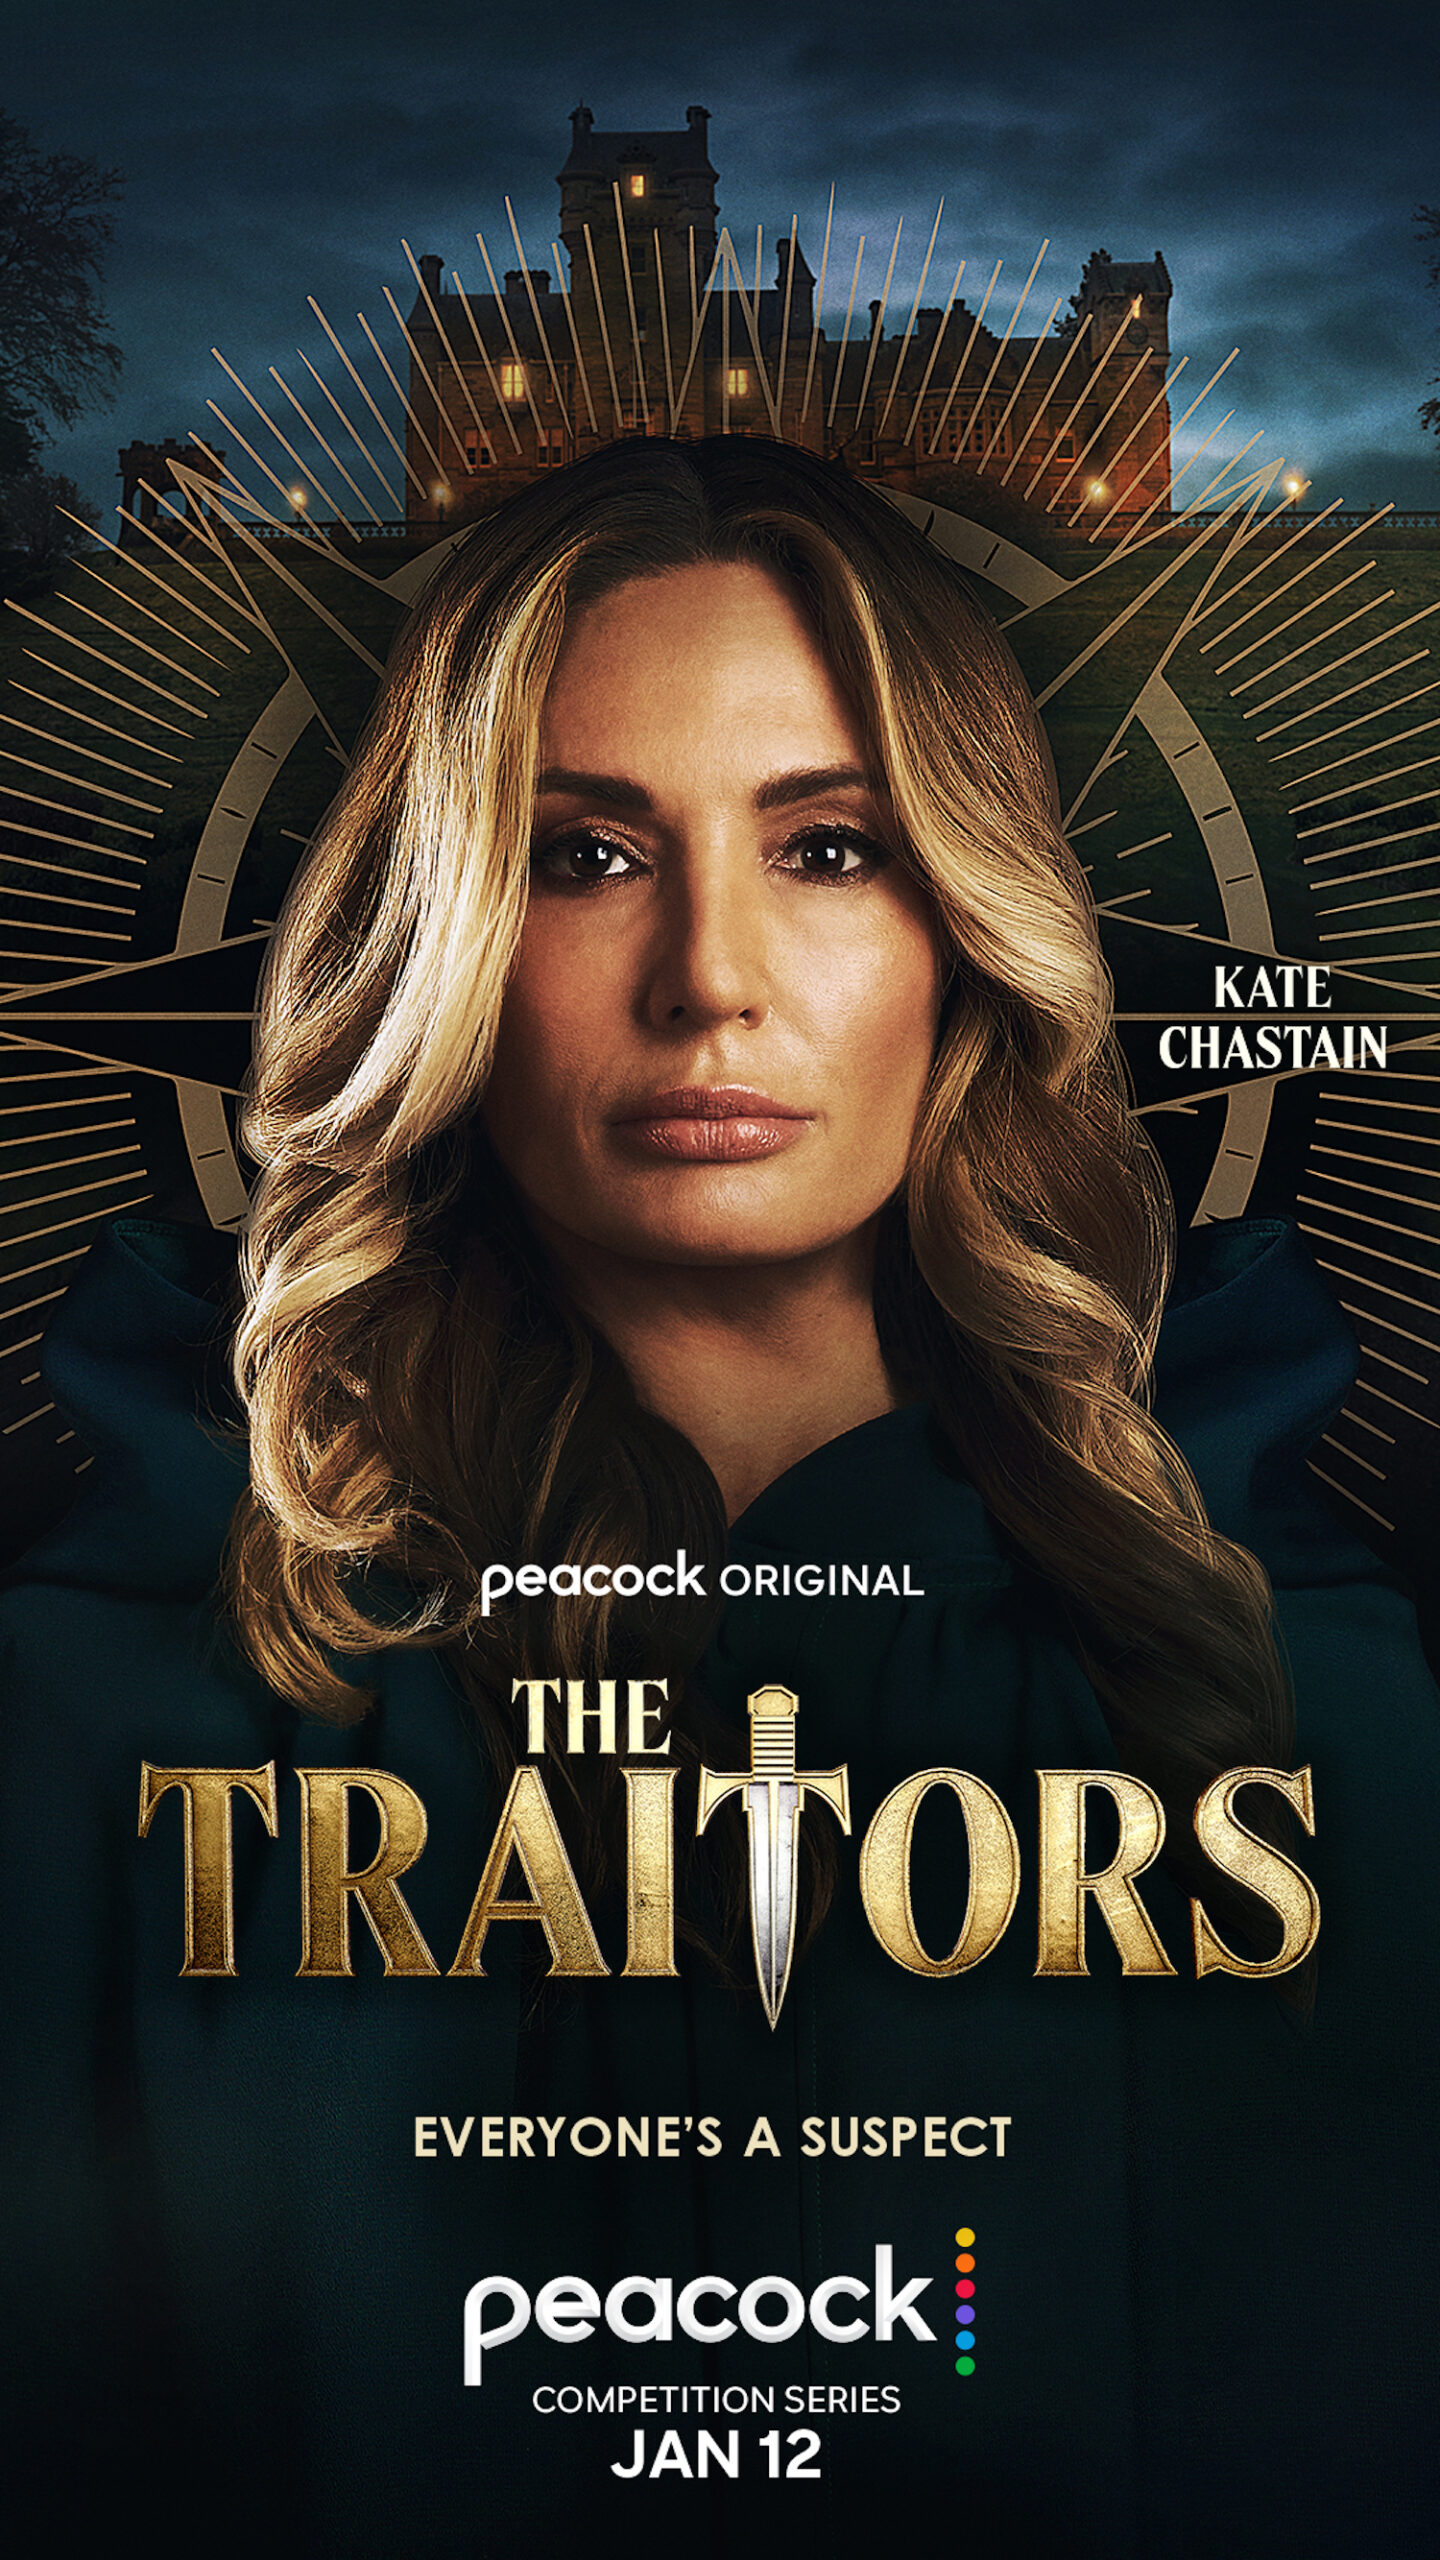 Kate Chastain for 'The Traitors'